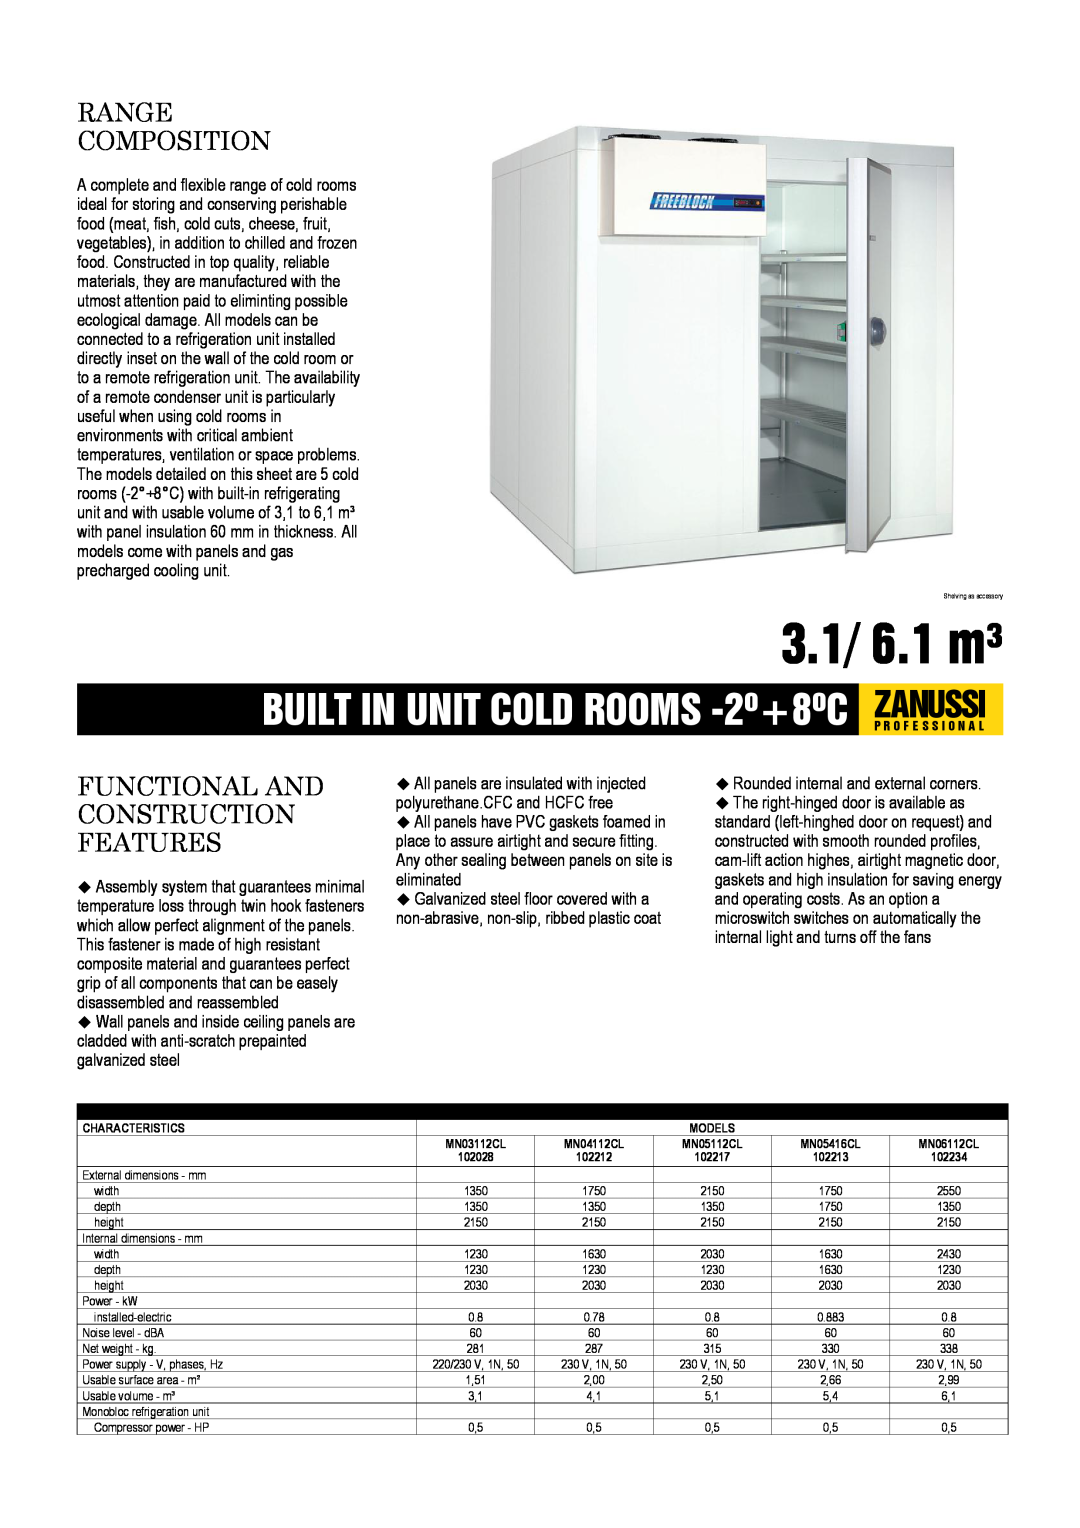 Zanussi MN05112CL, MN03112CL, MN04112CL dimensions 3.1/ 6.1 m³, Range Composition, Functional And Construction Features 